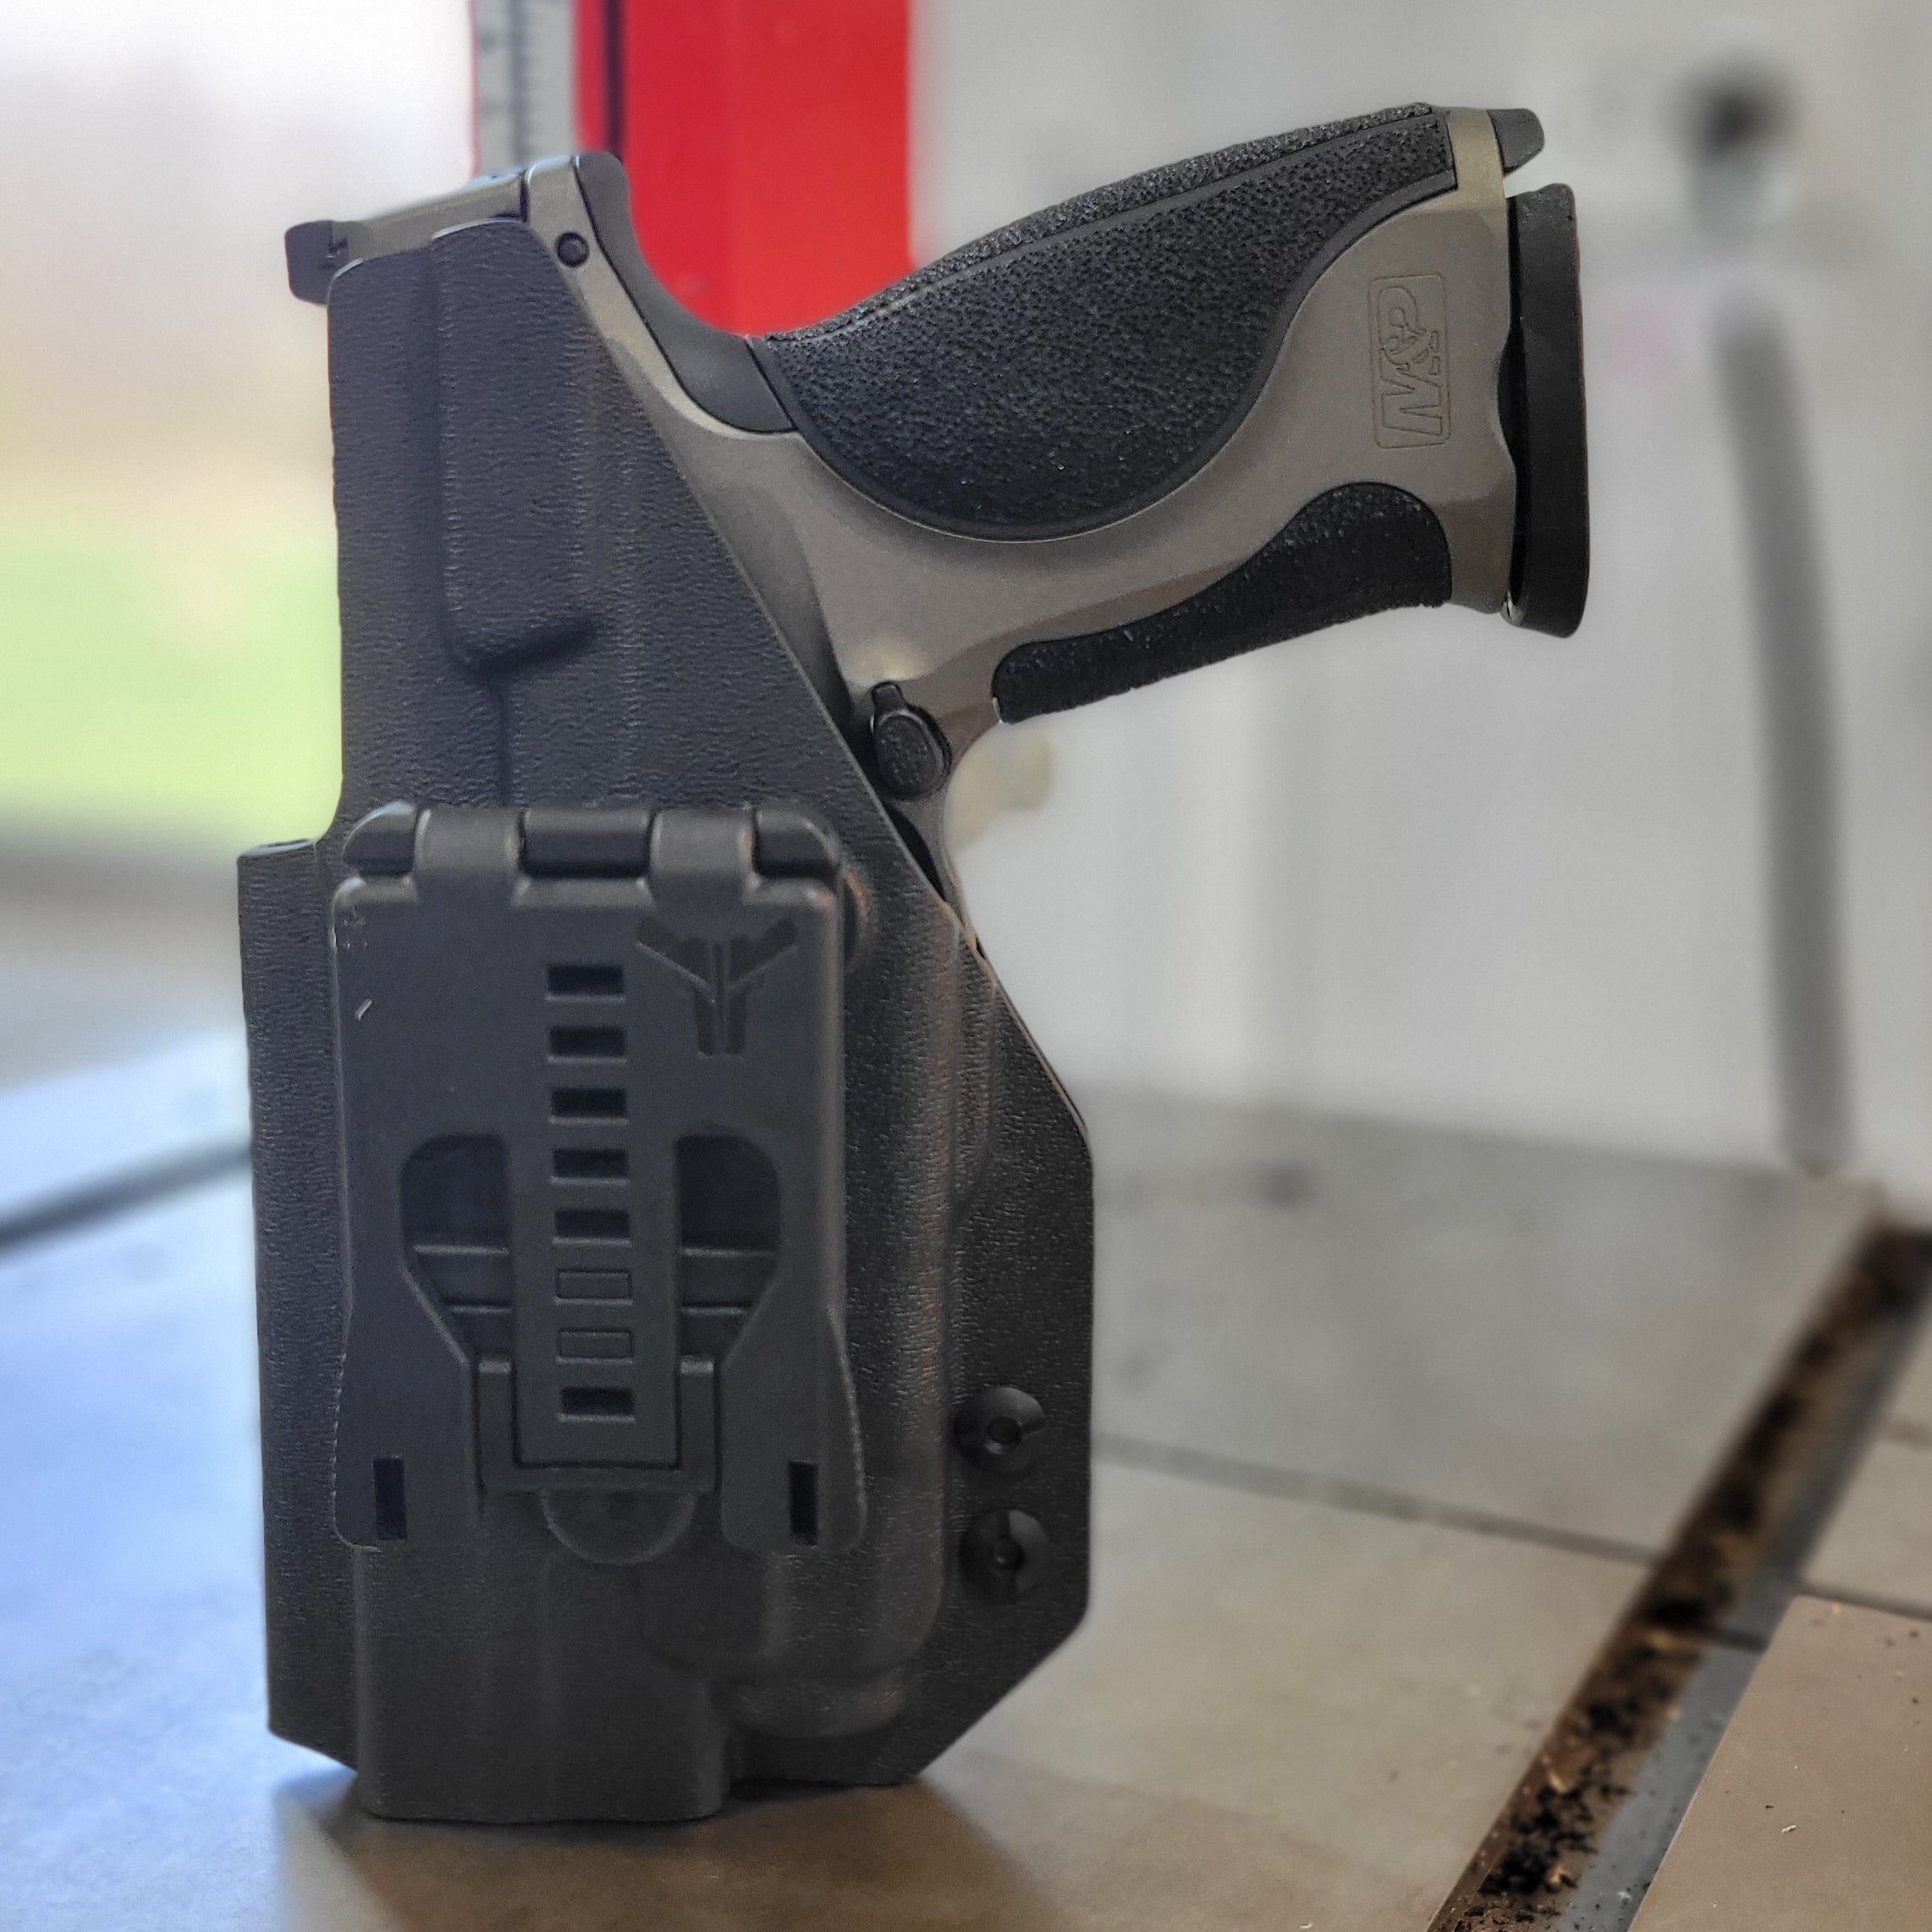 2023 Best Outside Waistband OWB Kydex Holster designed to fit the Smith & Wesson M&P M2.0 Metal pistols with the Streamlight TLR-7 or TLR-7A light mounted to the pistol. Full sweat guard, adjustable retention, minimal material, and smooth edges to reduce printing. Cleared for red dot sights. Proudly made in the USA.